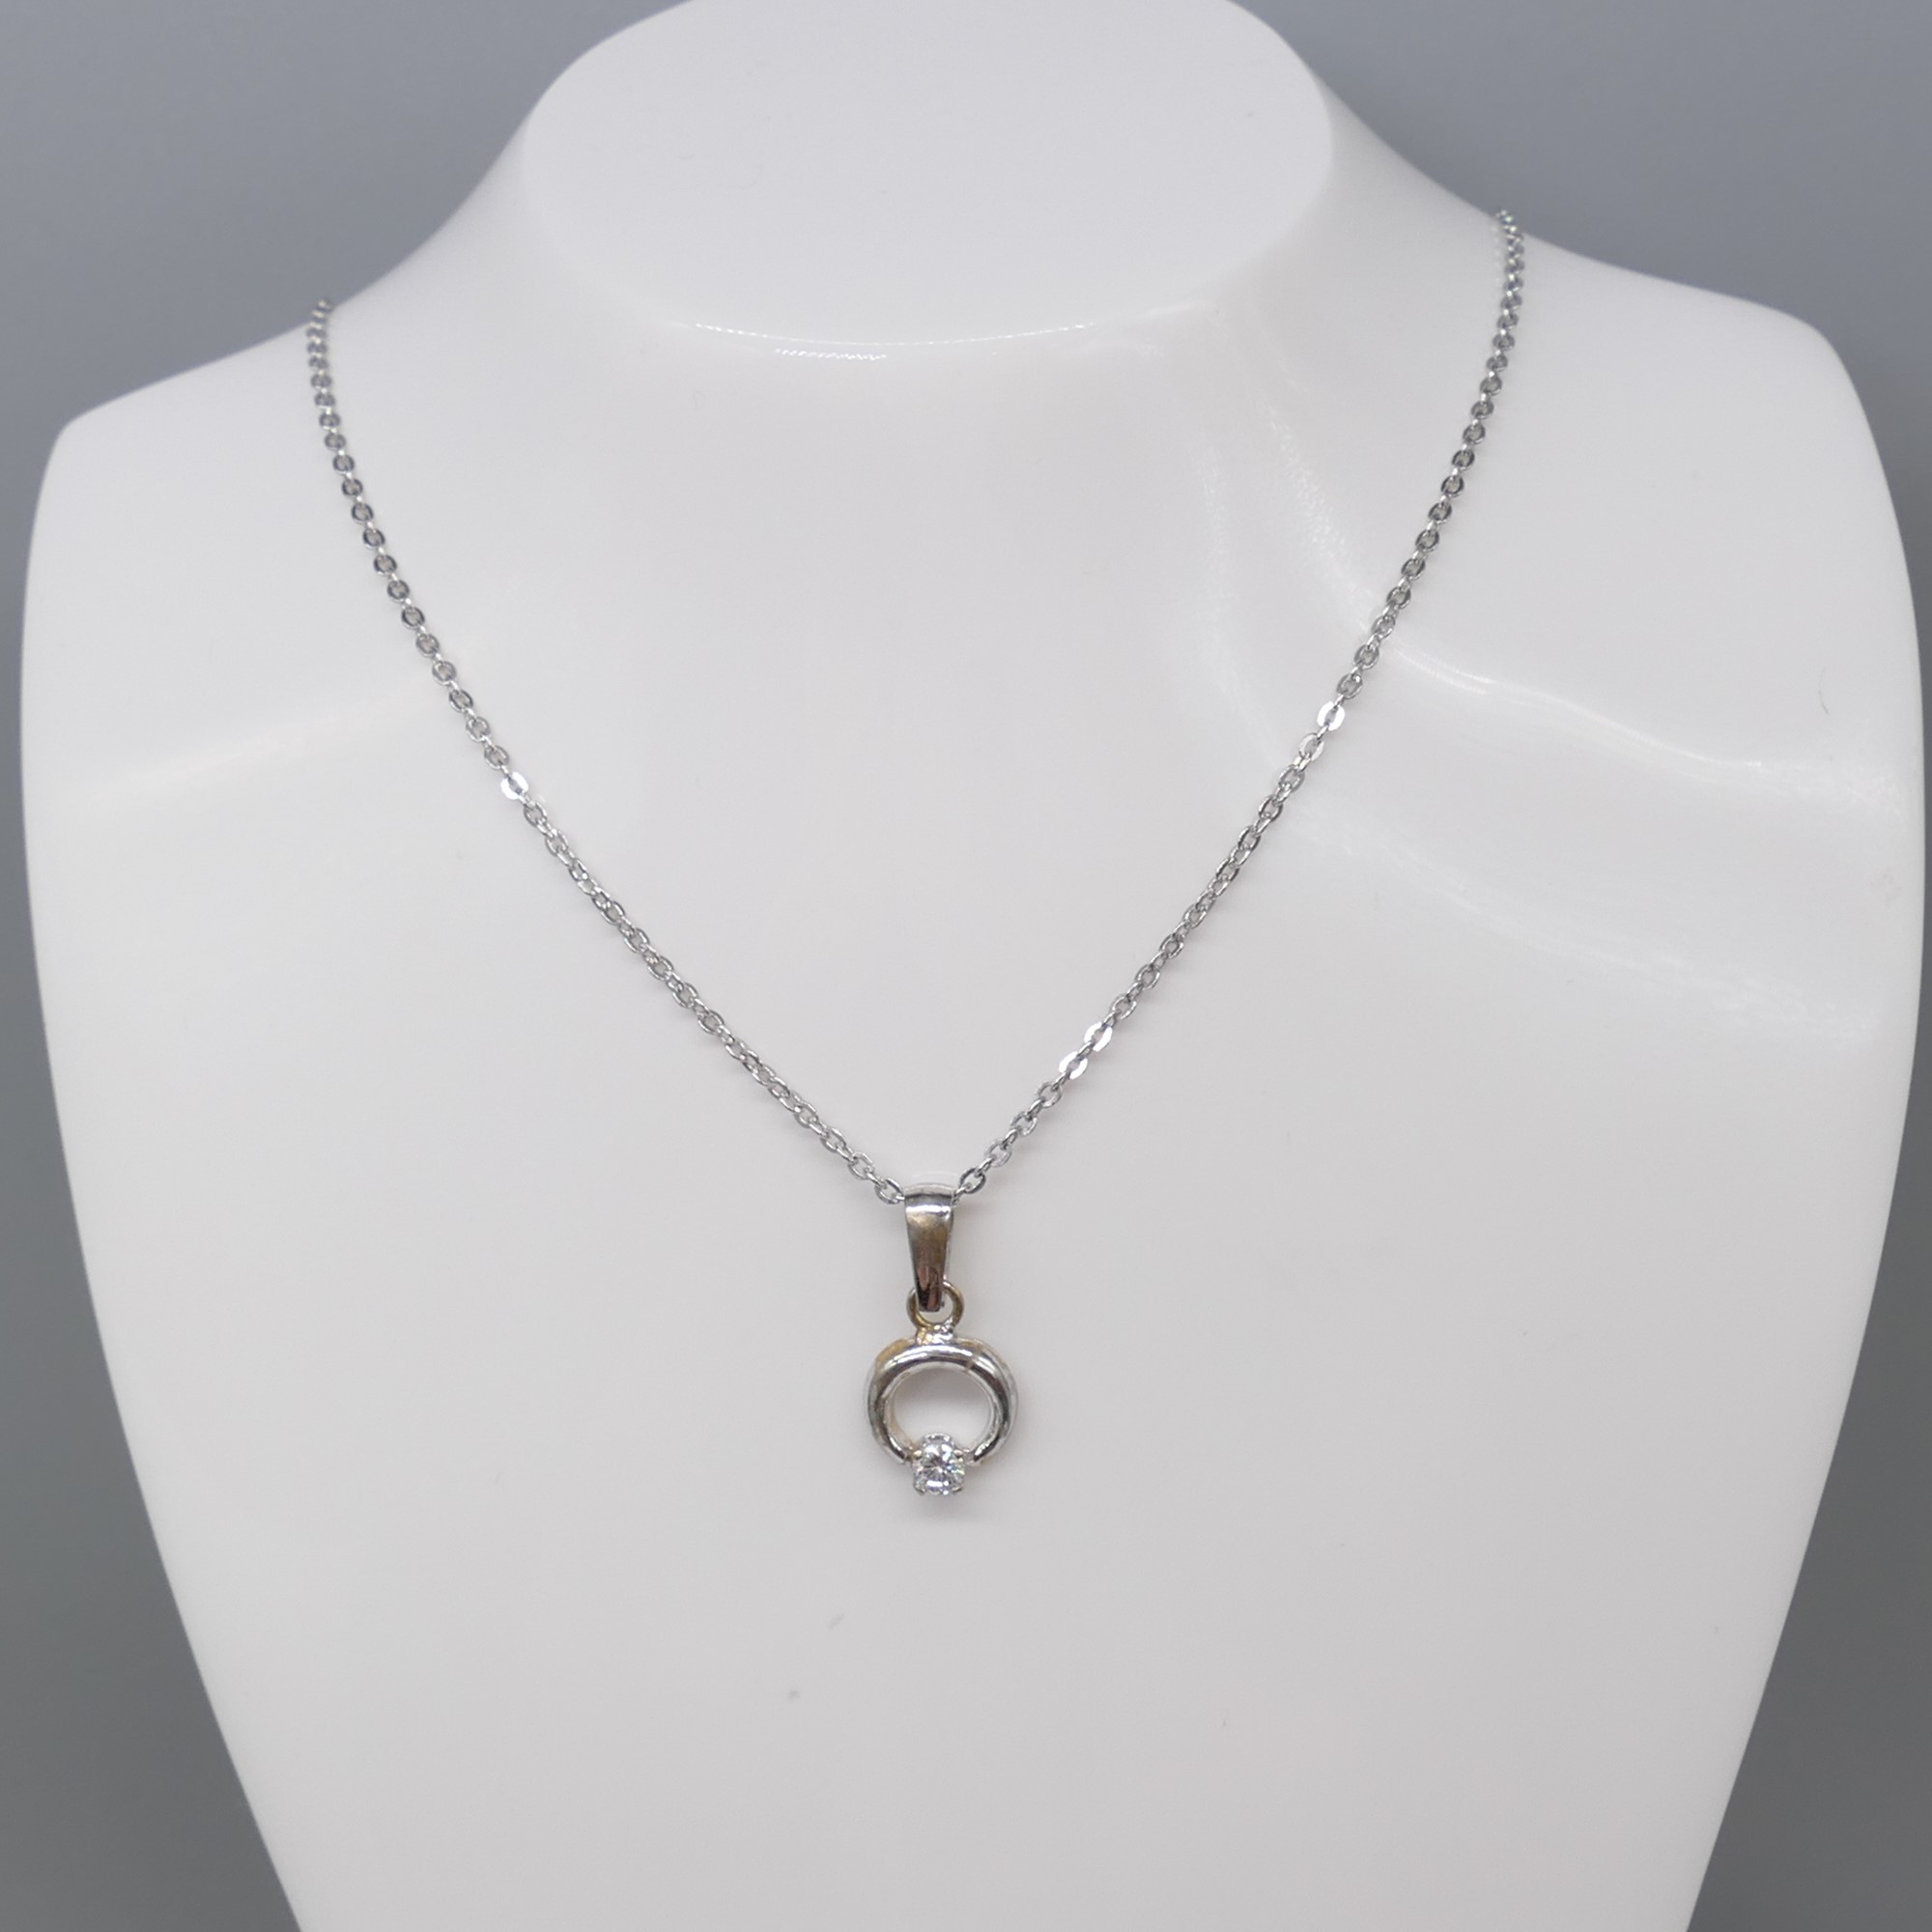 18 Carat White Gold and Silver, Cubic Zirconia-Set Pendant With Silver Chain, Boxed - Image 3 of 6